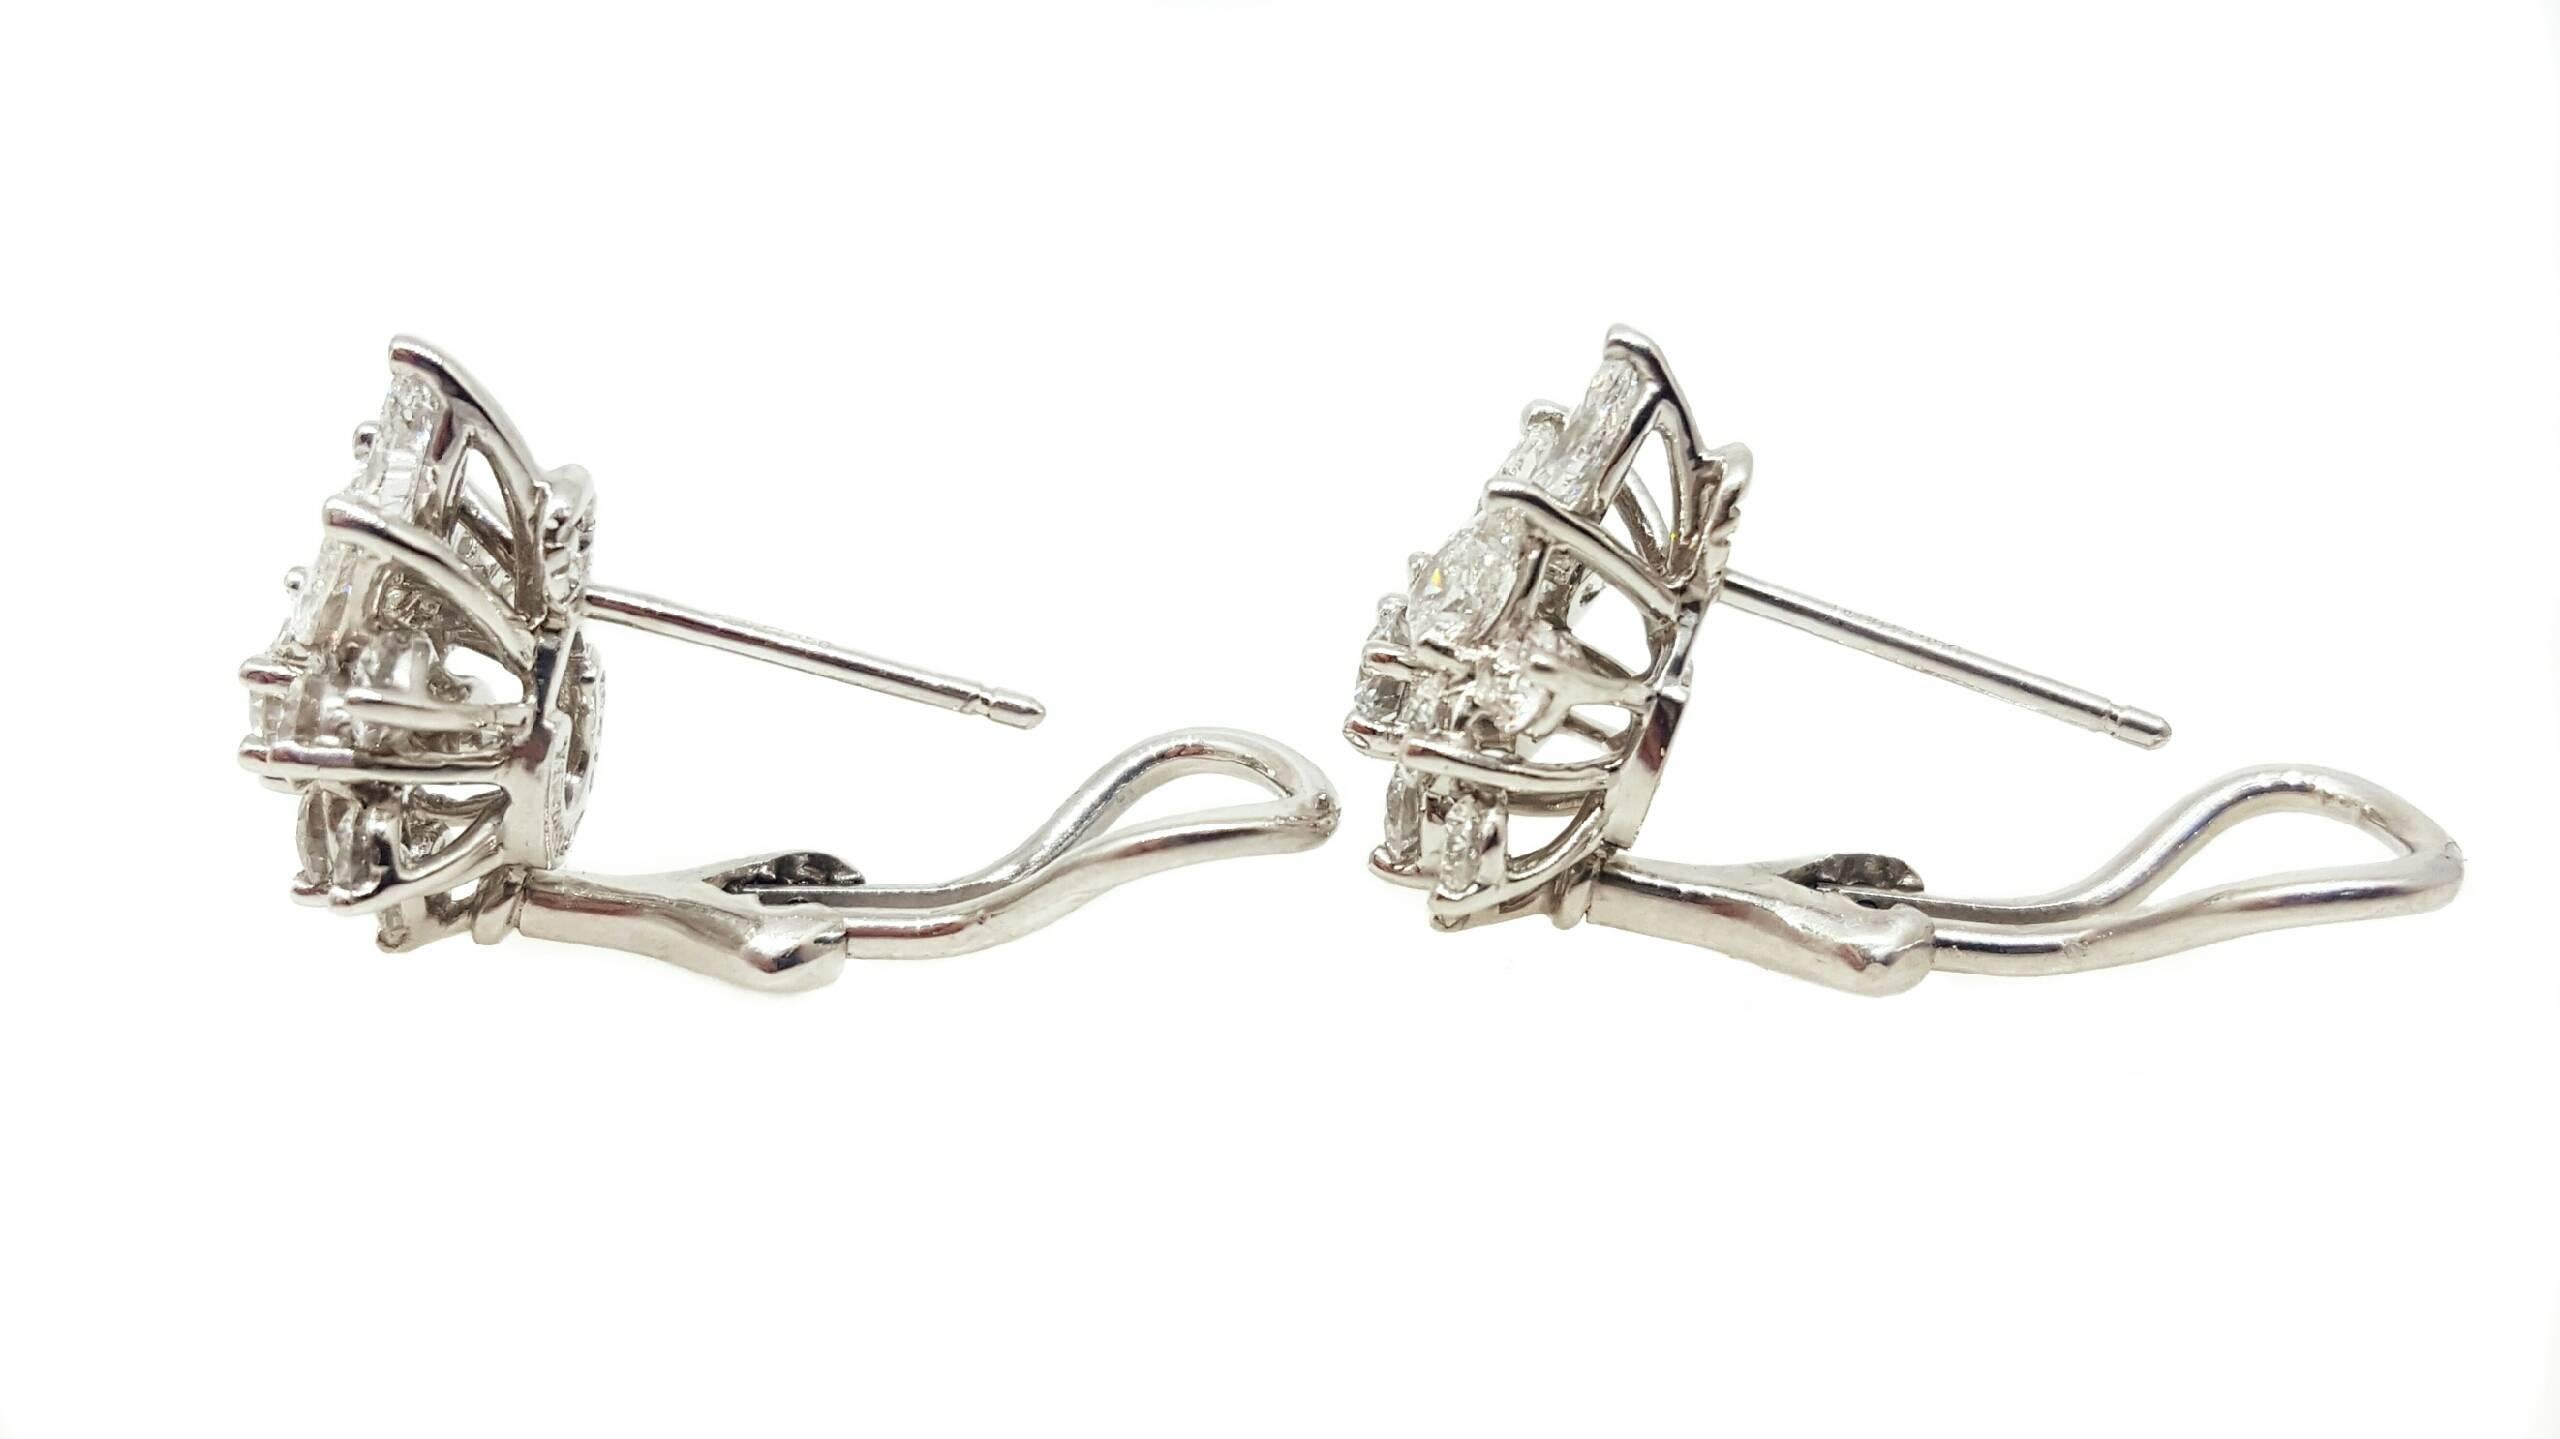 A wonderful pair of Tiffany & Co. Platinum cluster design earrings set with 2.50cttw of diamonds. The diamonds are all F to G color with VVS2 clarity. There are 3 Pear shaped diamonds and 10 Round Brilliant cut diamonds in each earring. The